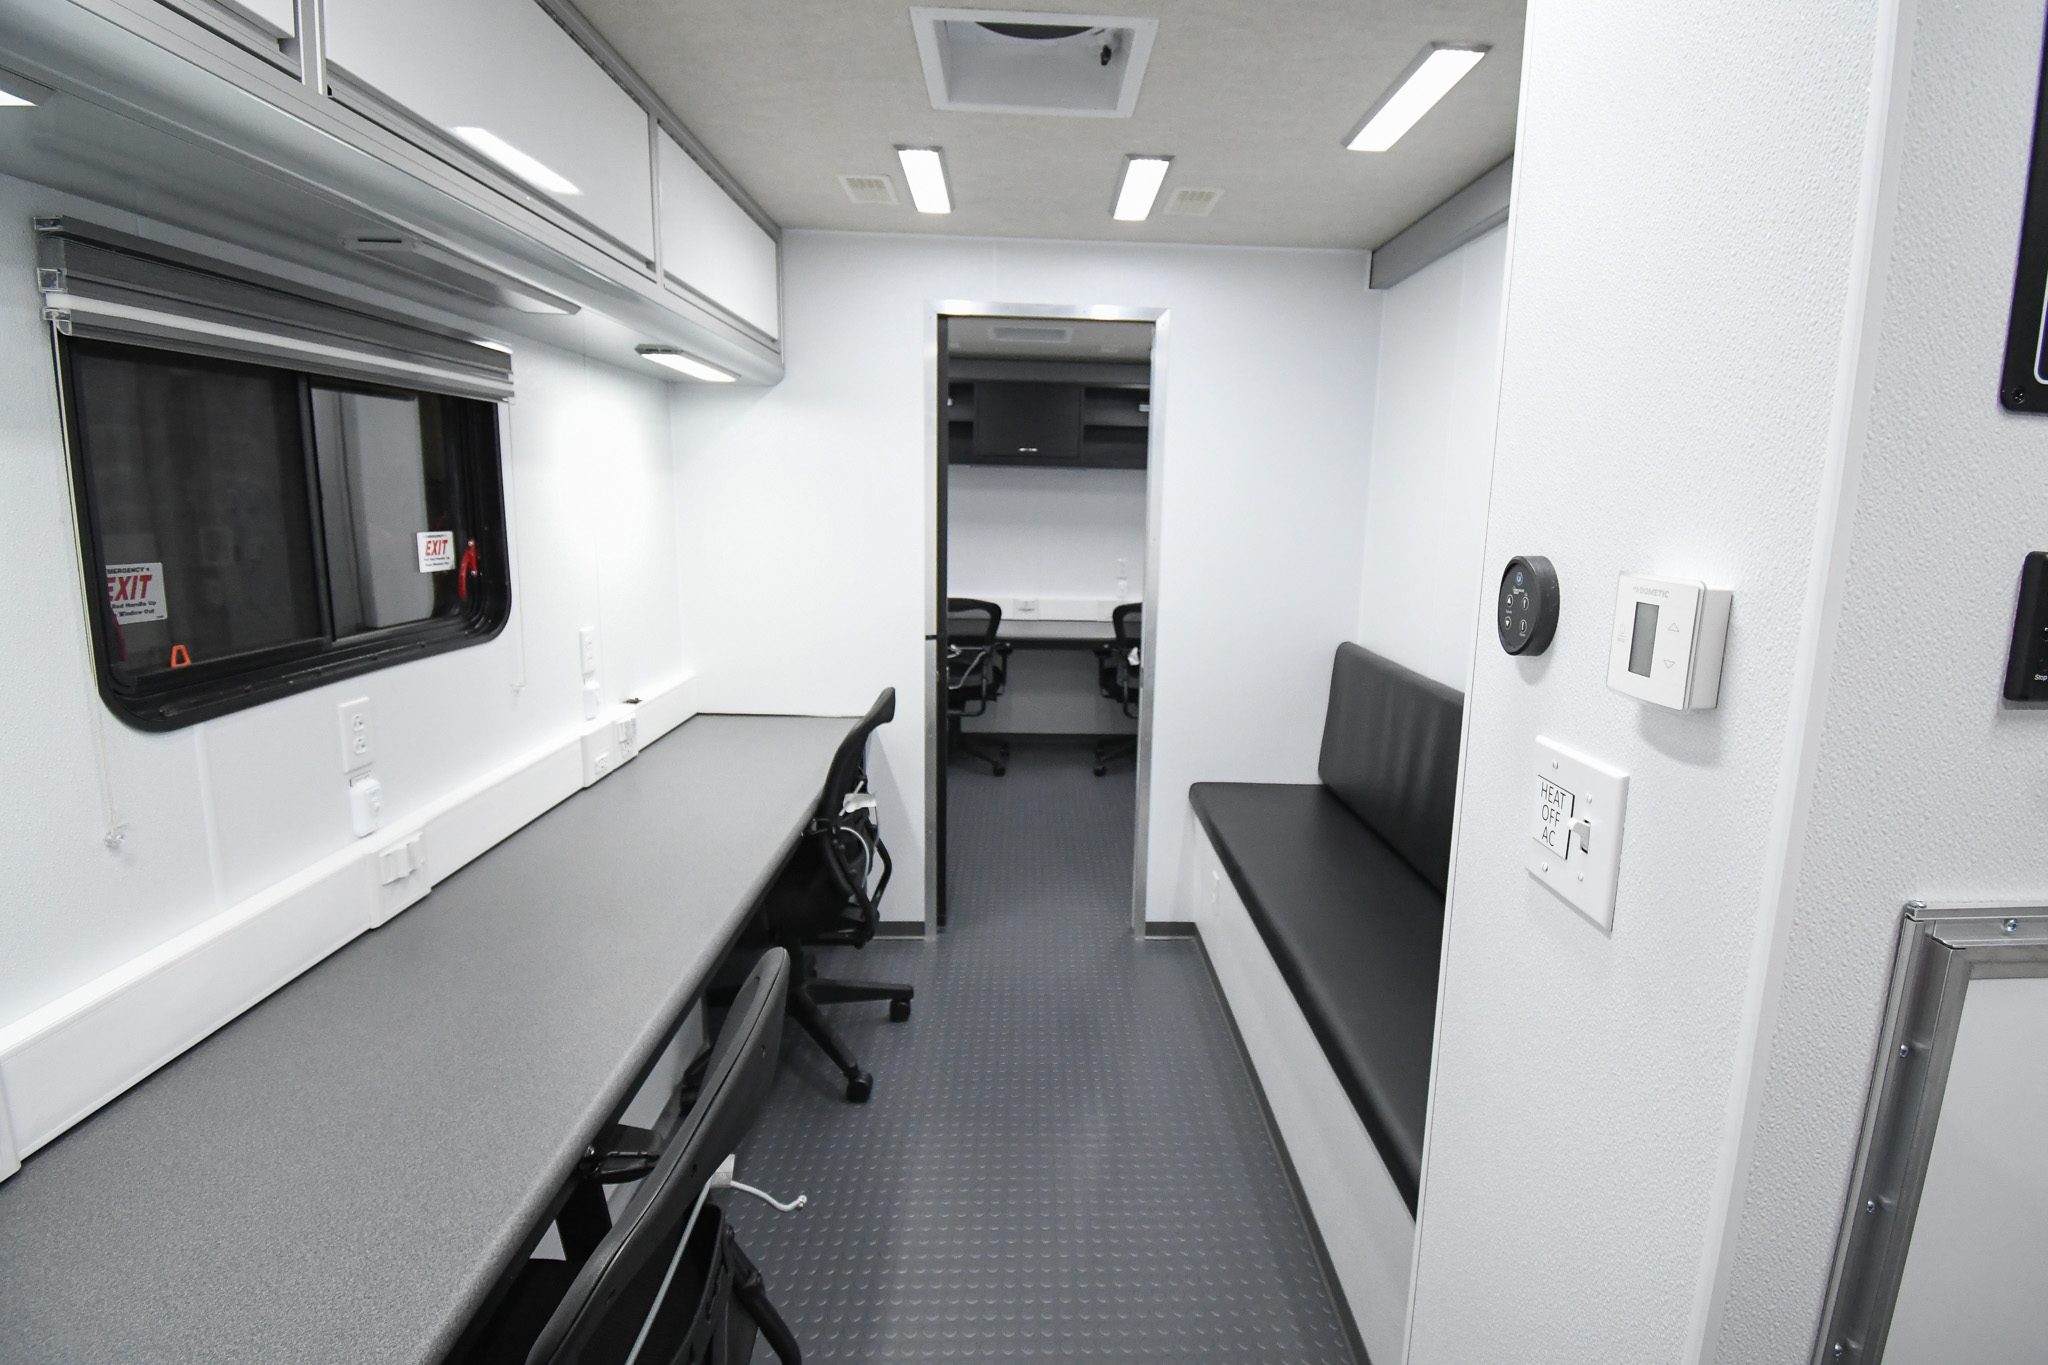 A back-to-front view inside the unit for Susquehanna County, PA.